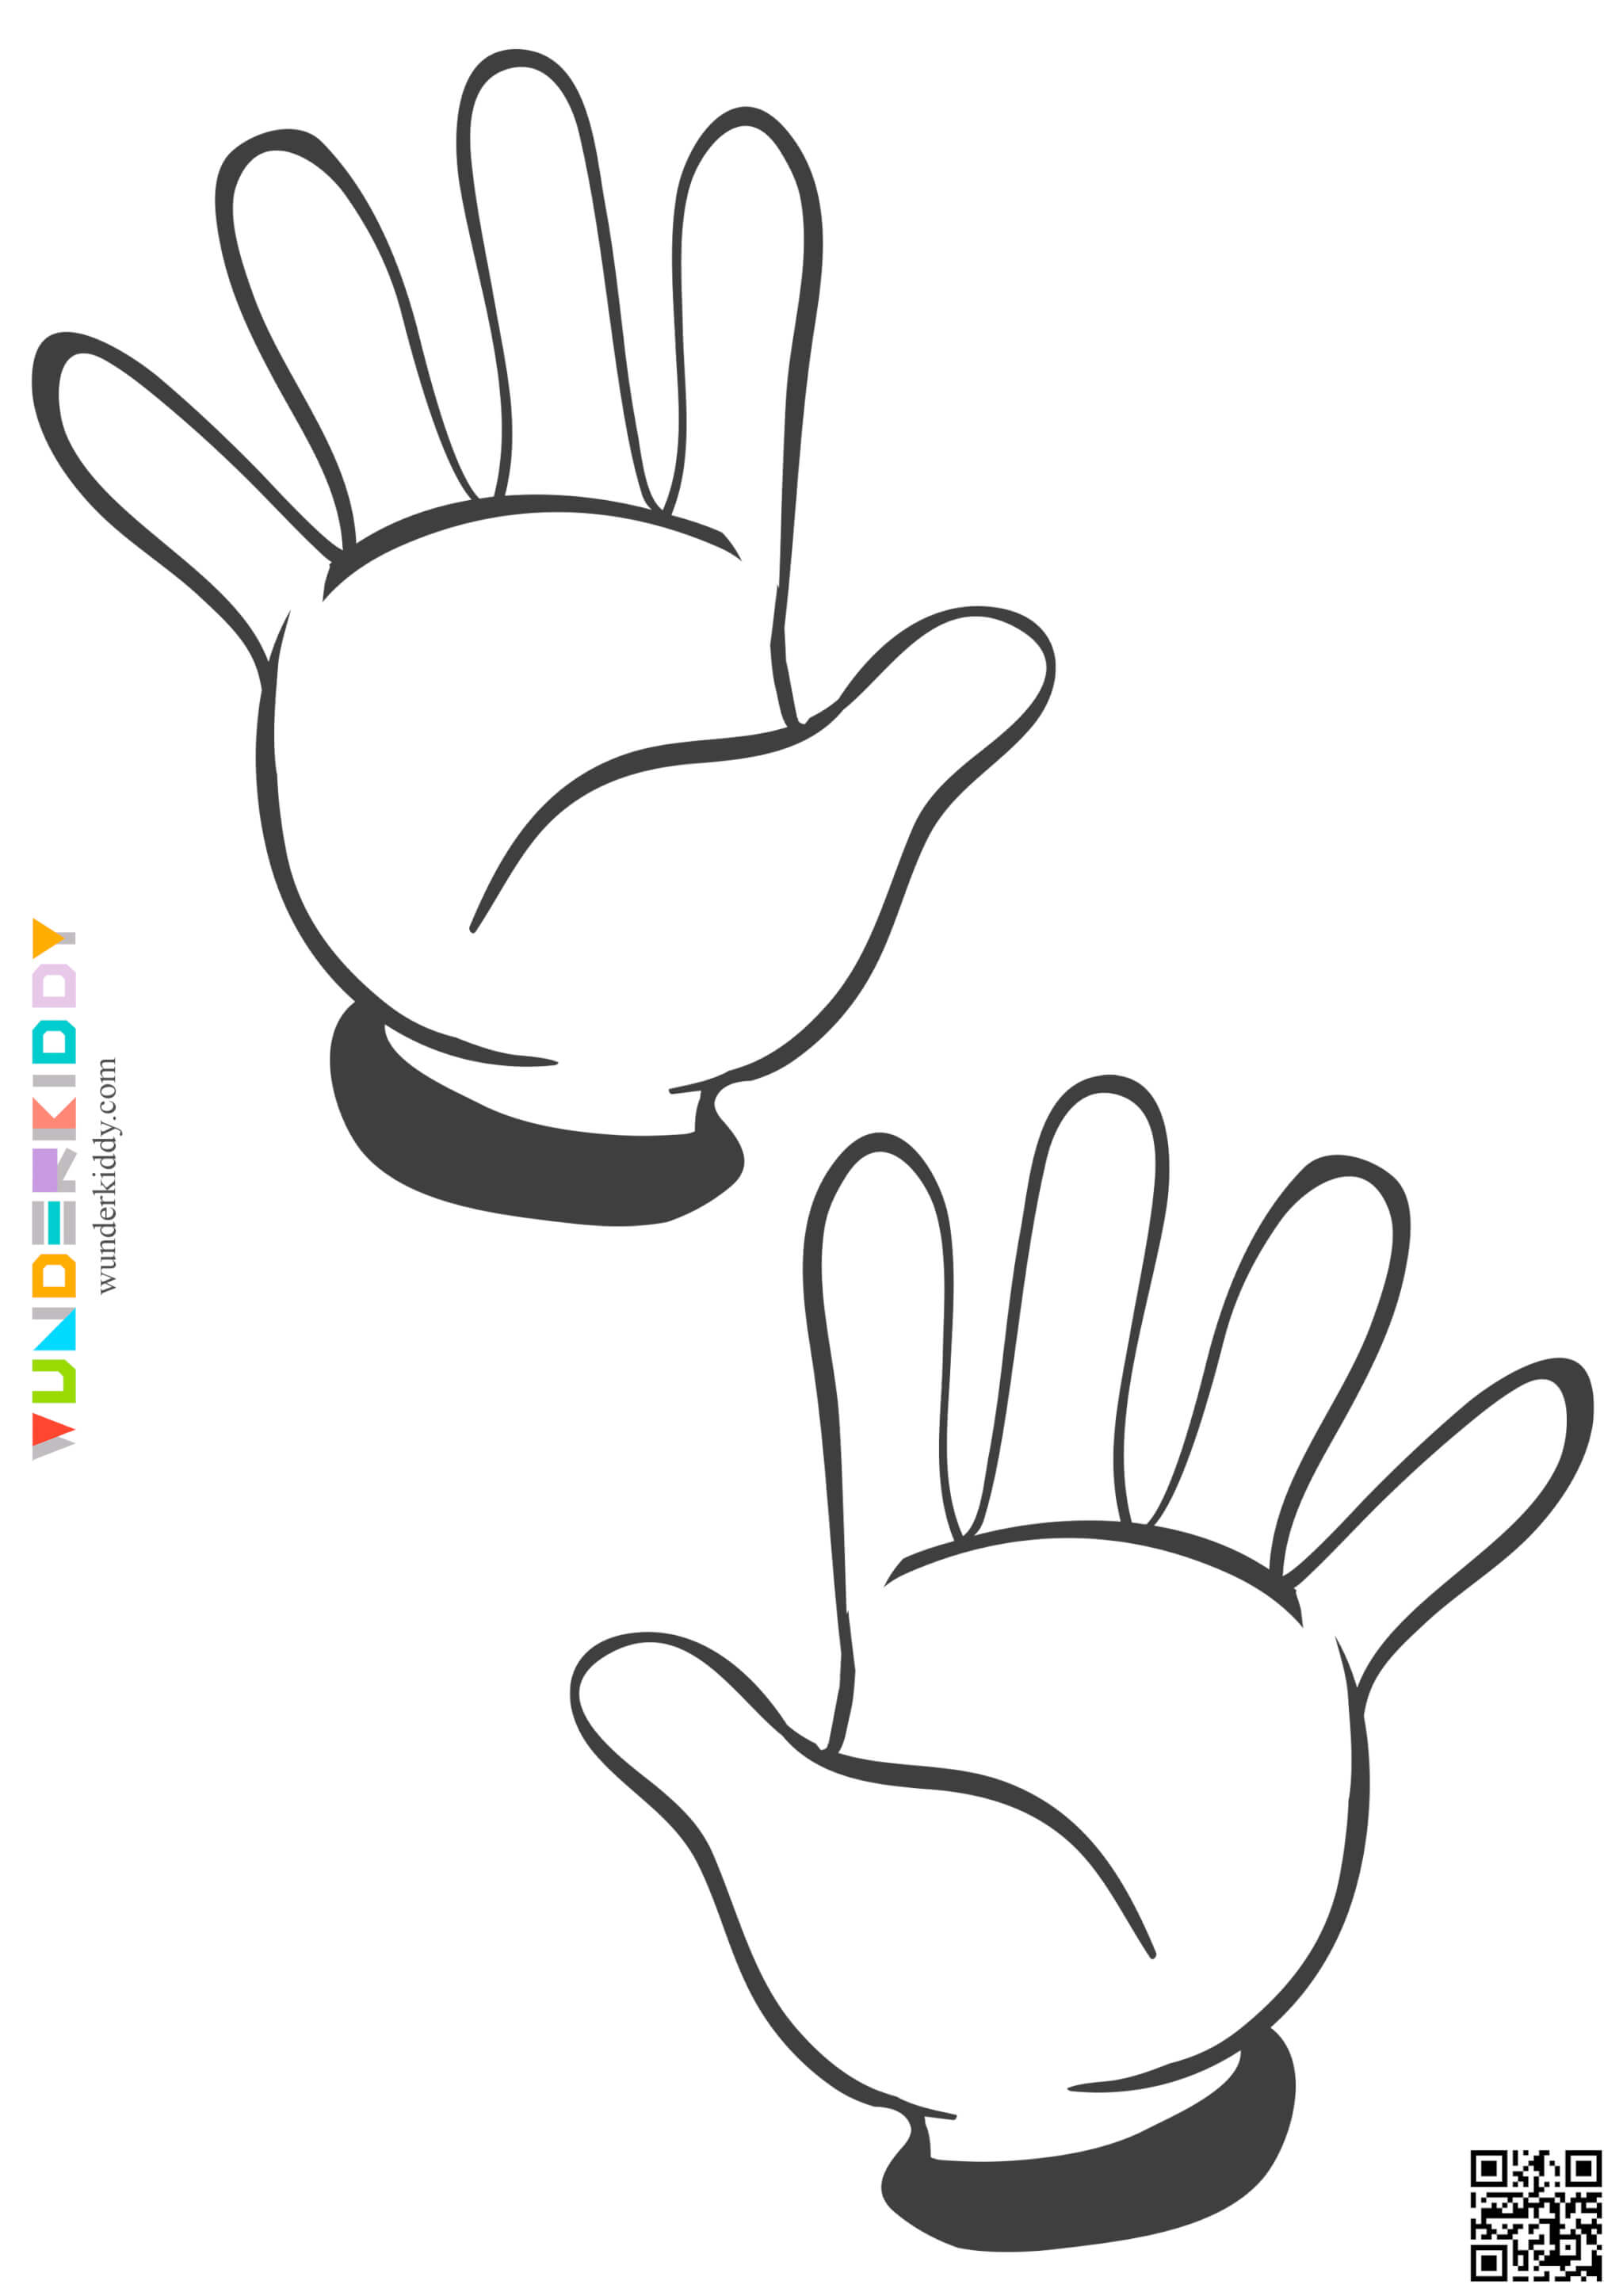 Printable Hands Template - Image 13